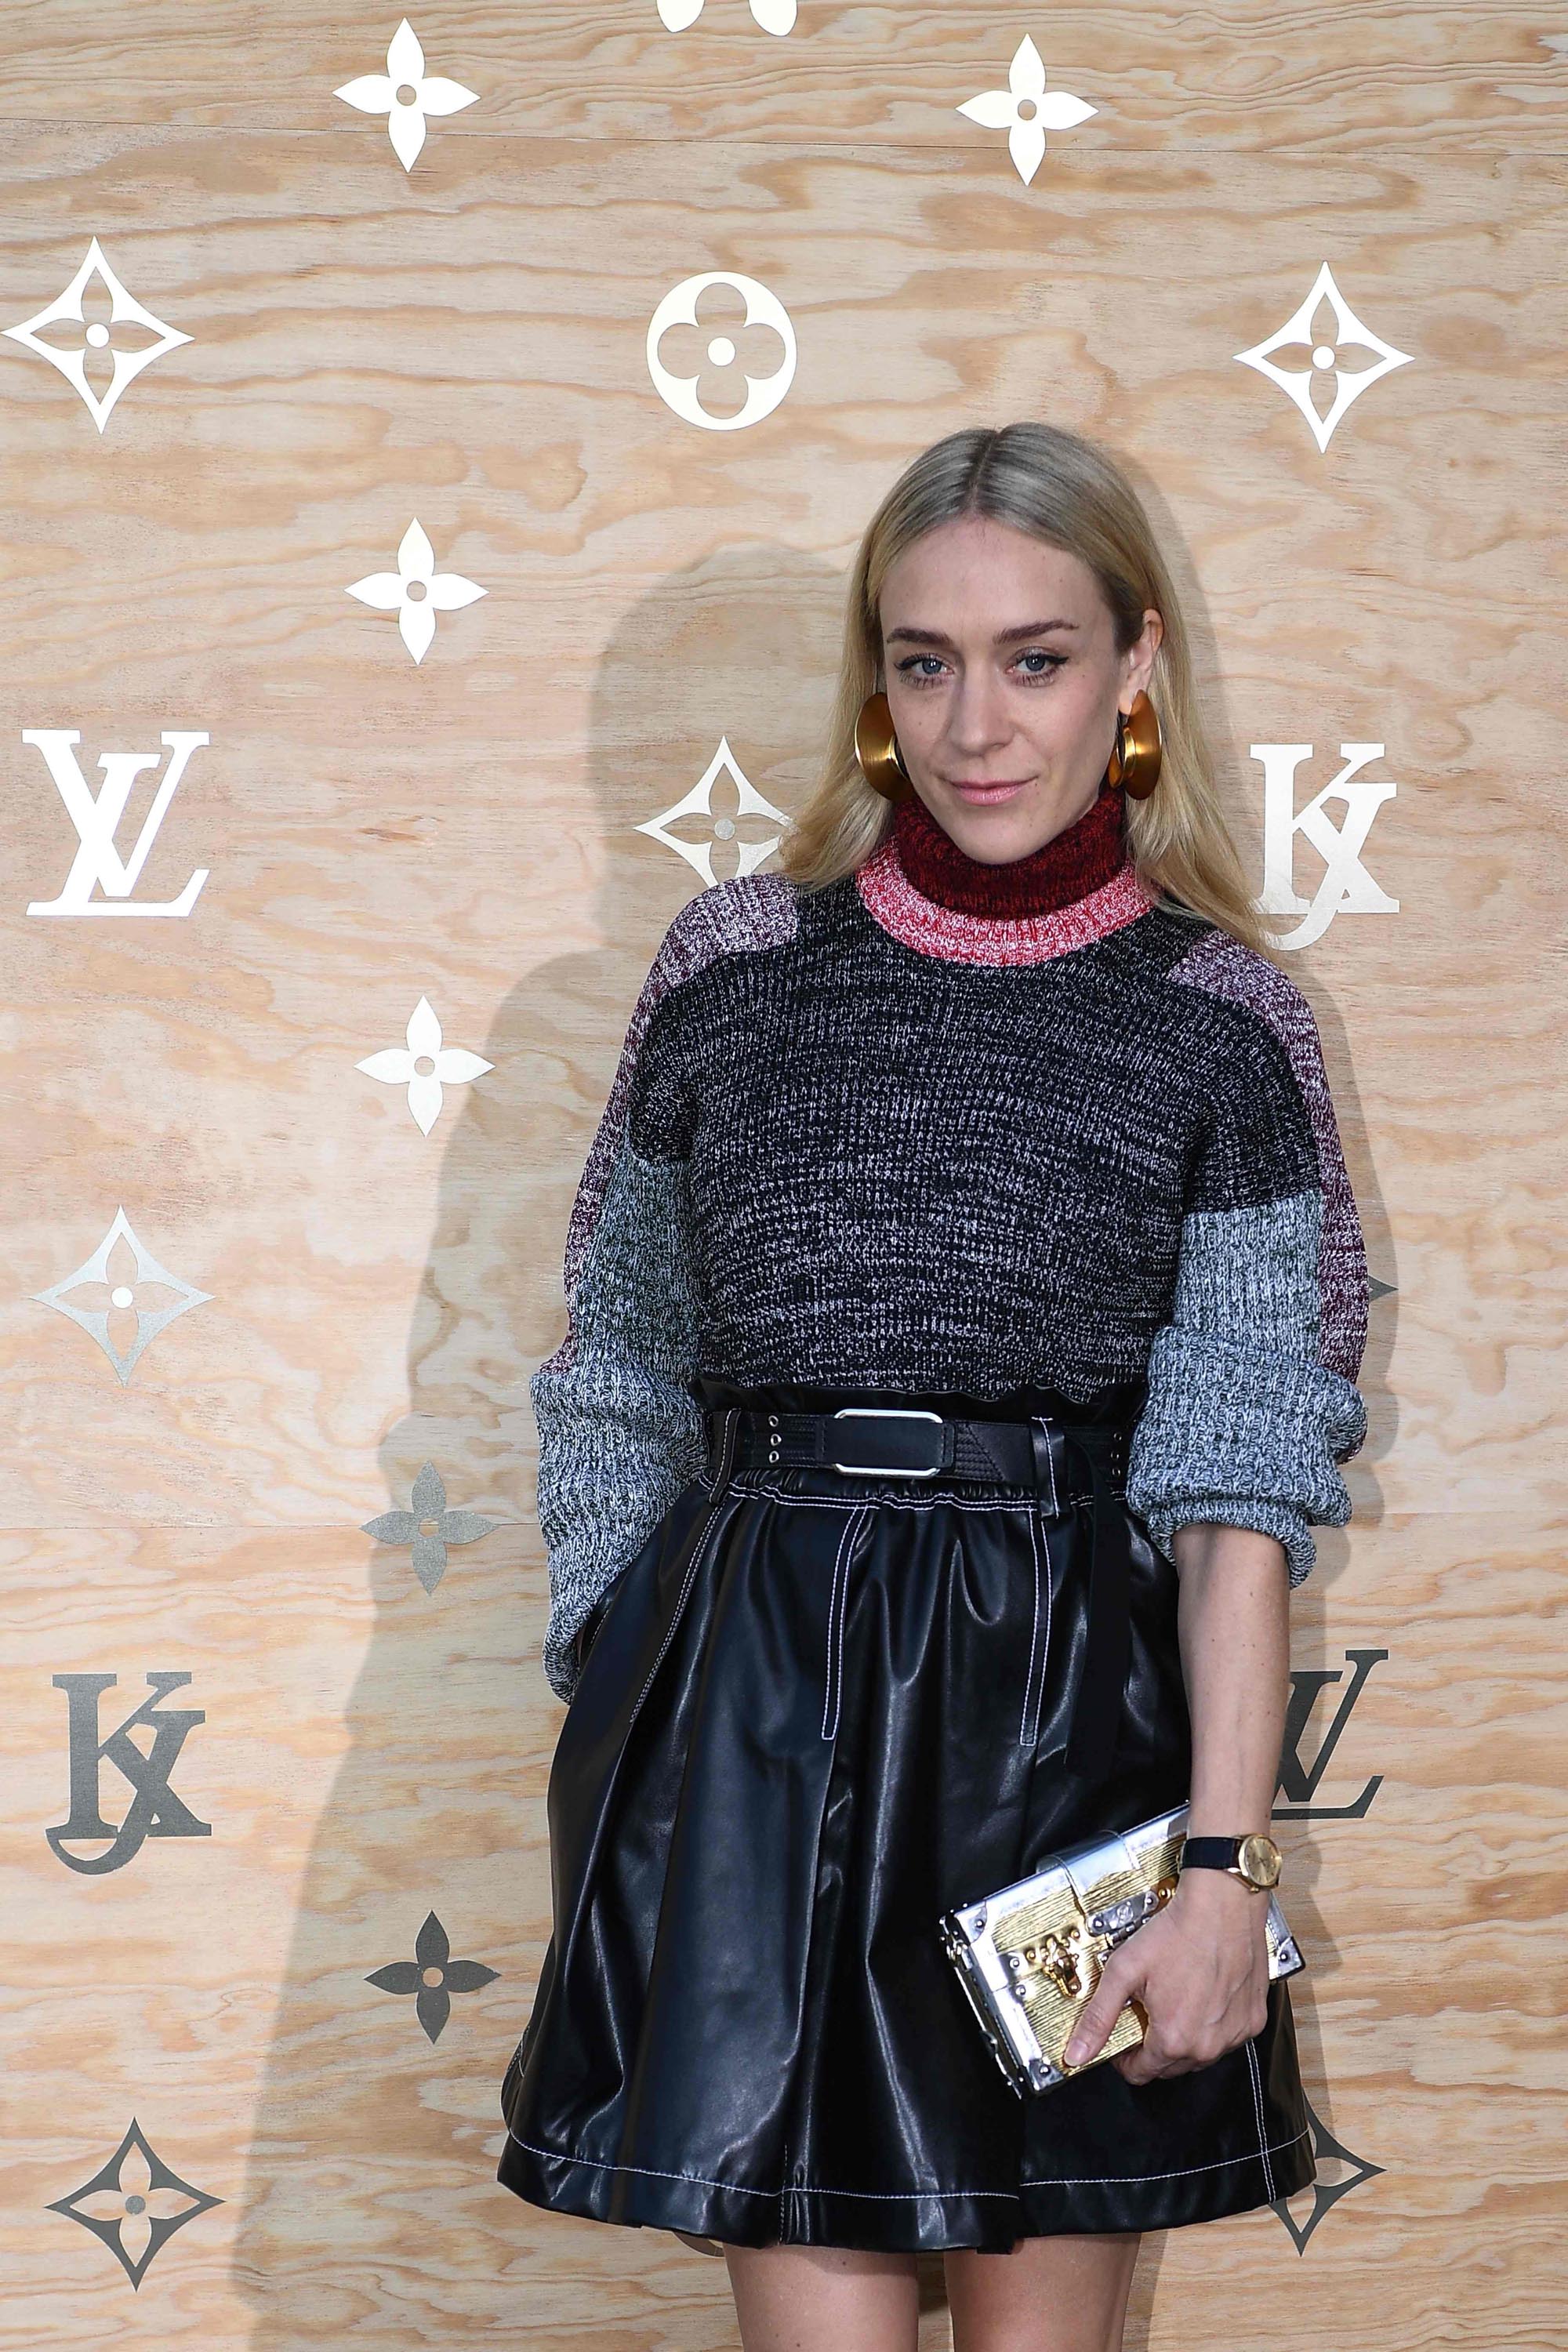 Chloe Sevigny attends Louis Vuitton dinner party